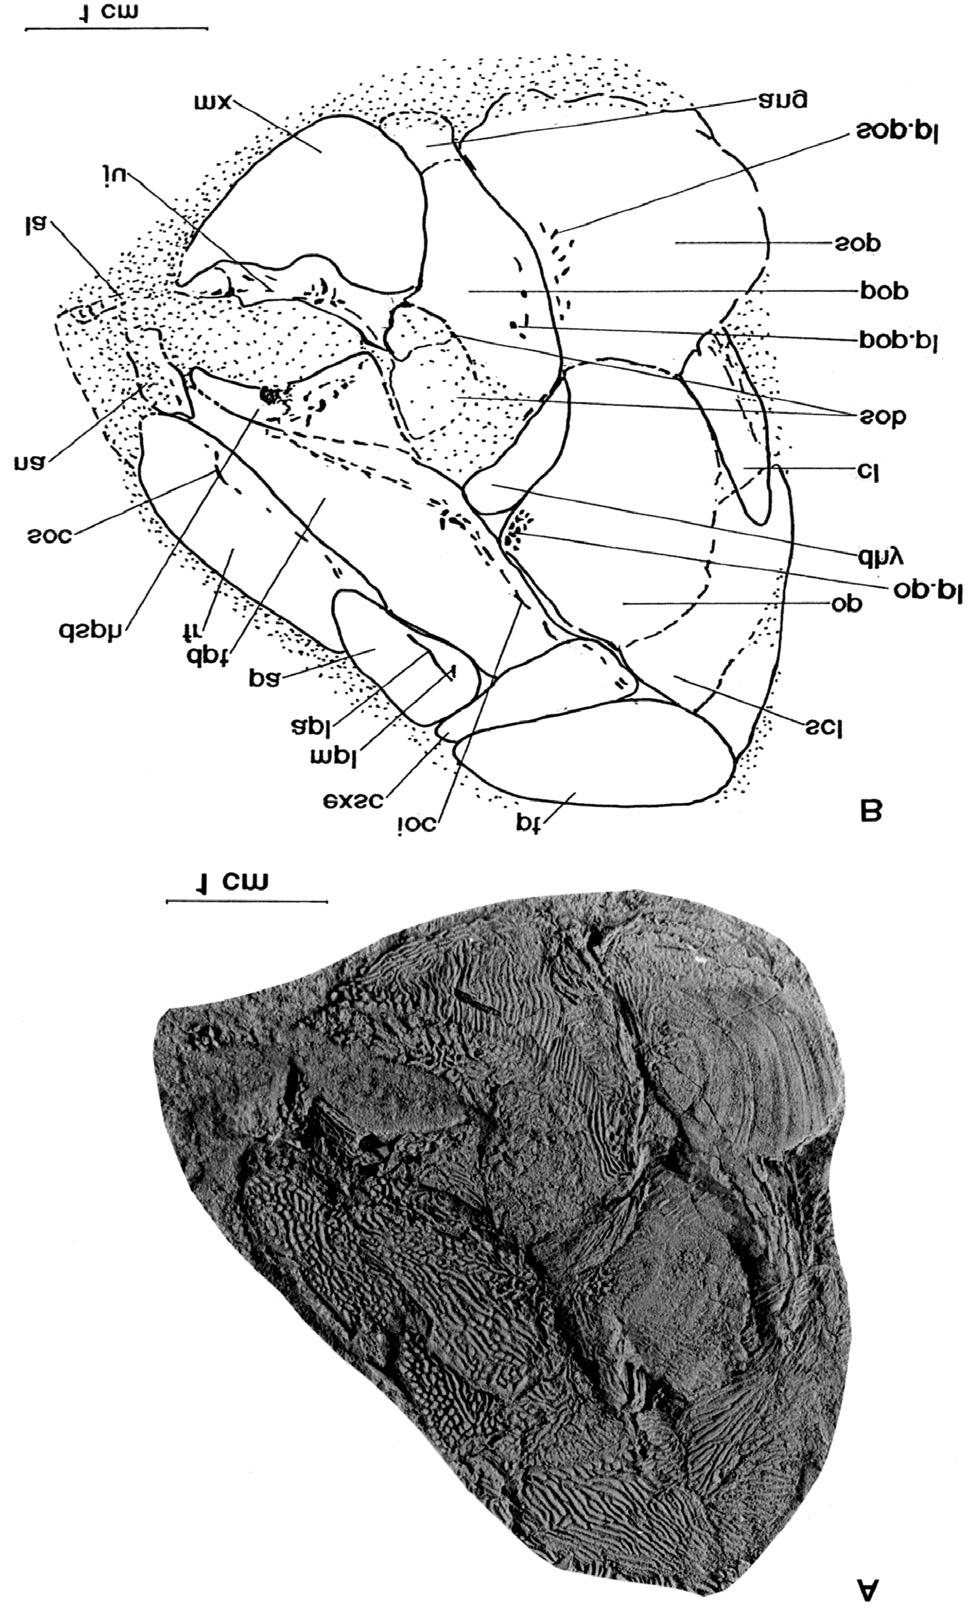 Figure 1. Blourugia seeleyi paratype PB/96/5. A, Photograph in lateral view showing skull region dermal detail. B, Camera lucida reconstruction. dorsal margin of the orbit.